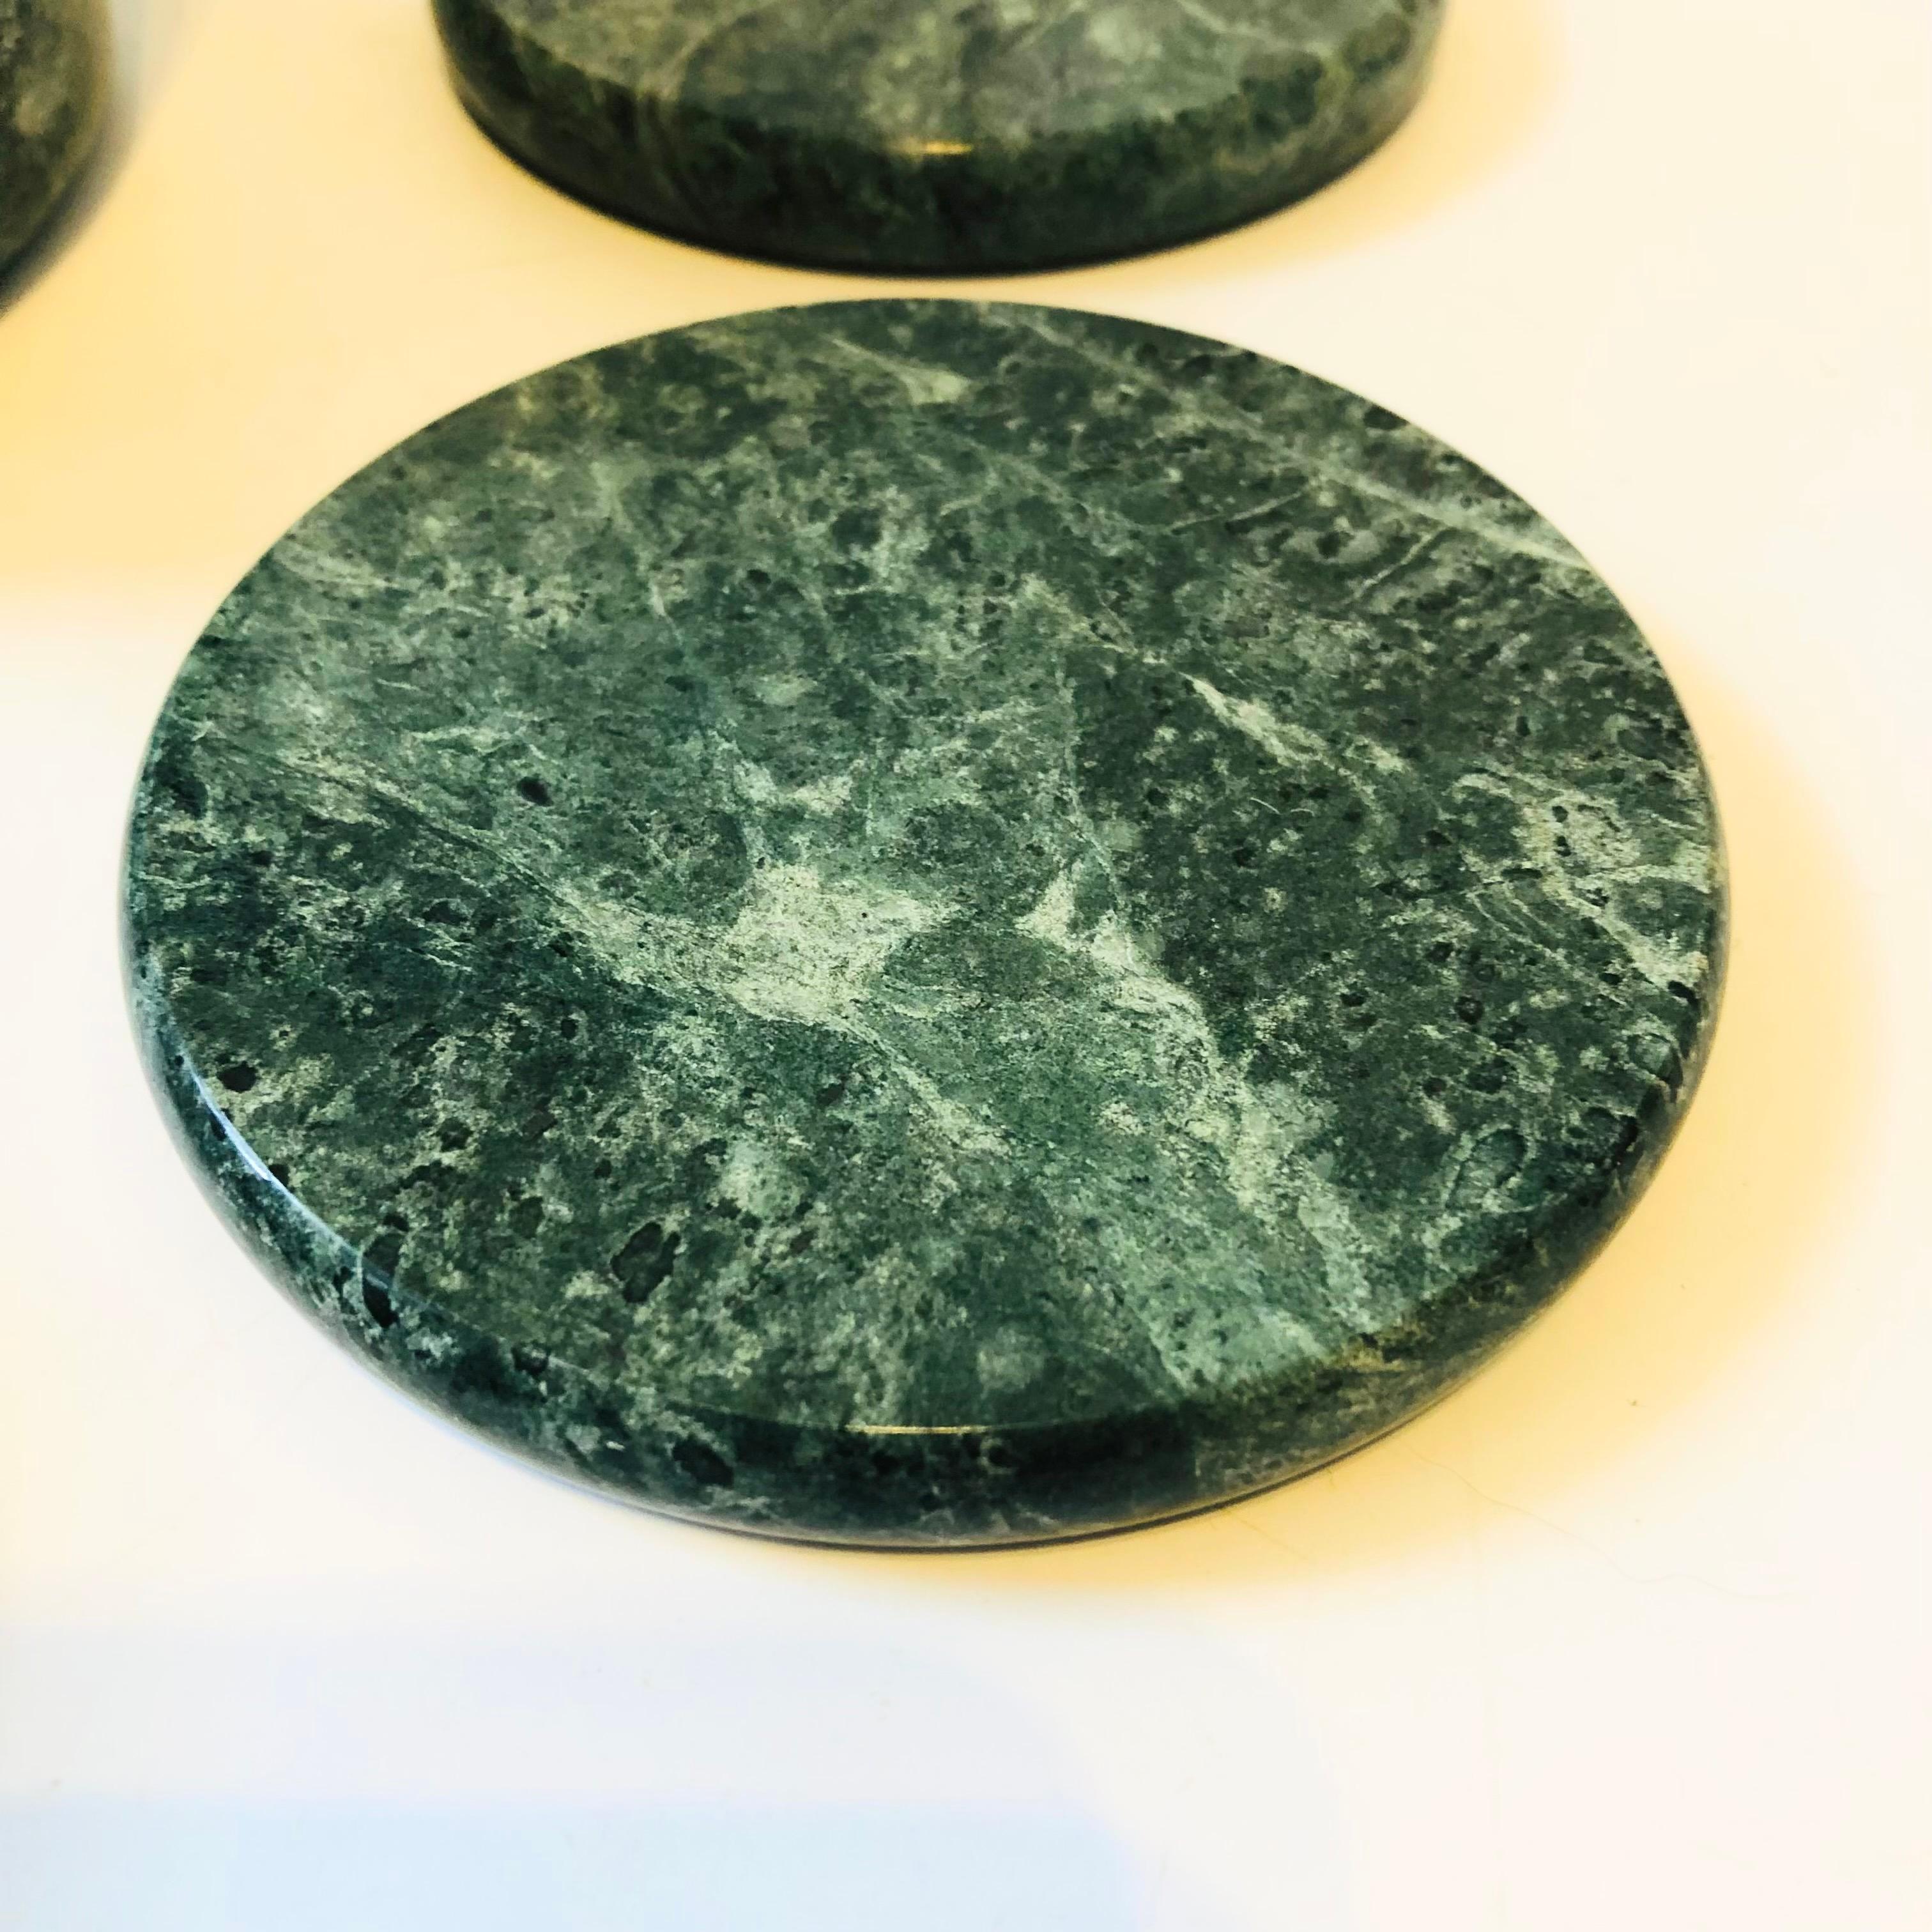 Green Stone Coaster Set - Set of 6 Coasters in Holder 2